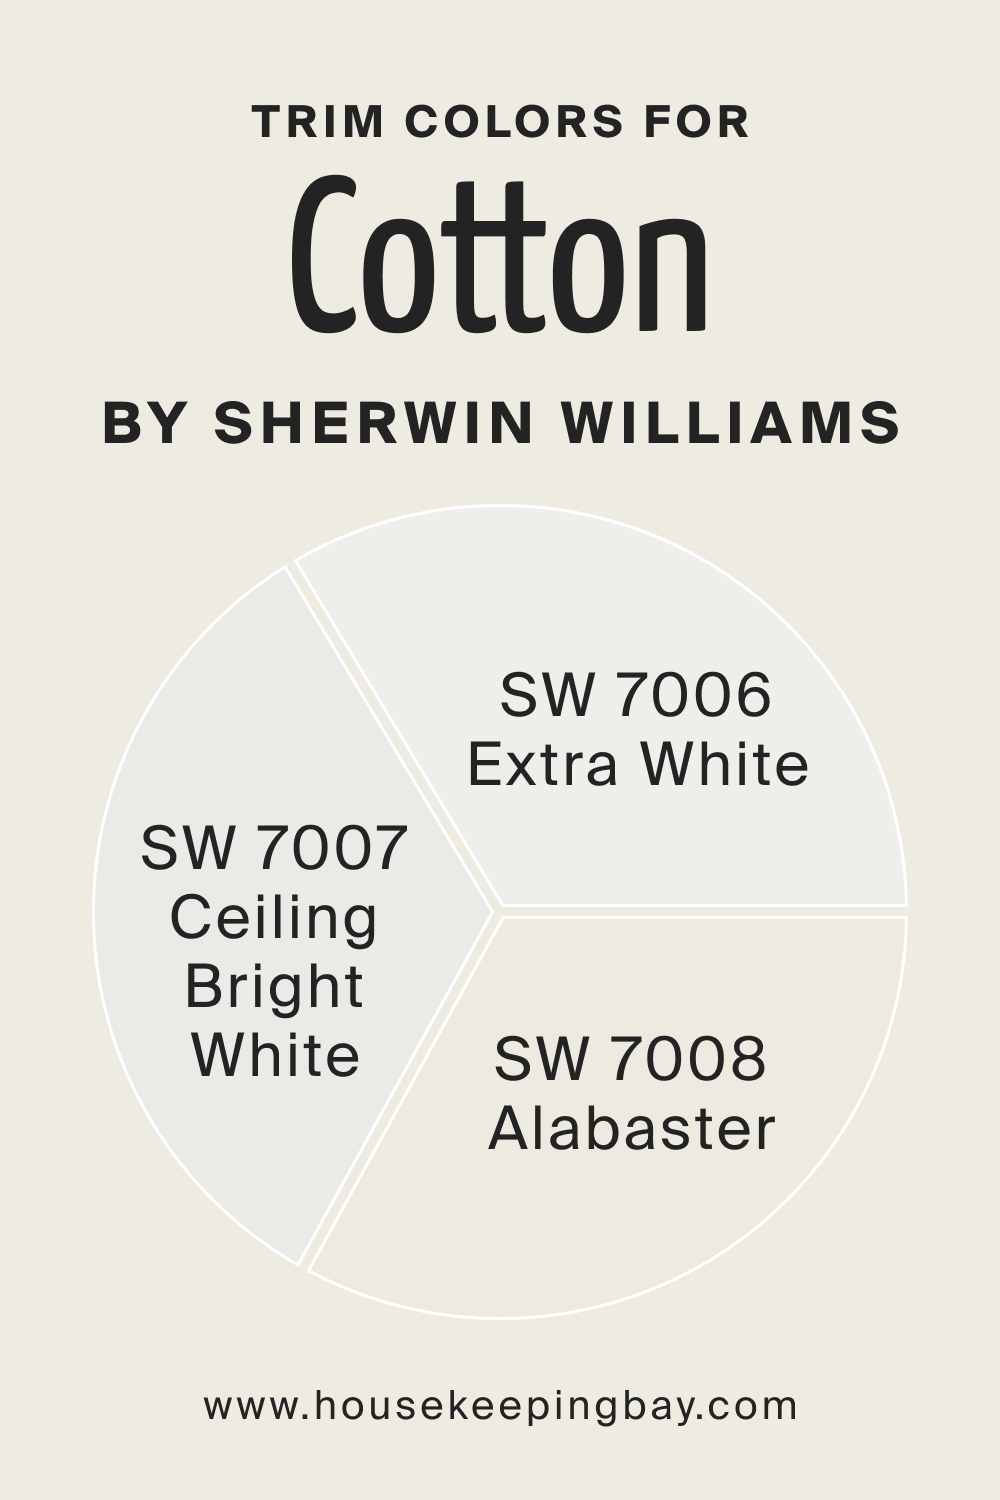 Trim Colors of SW 9581 Cotton by Sherwin Williams